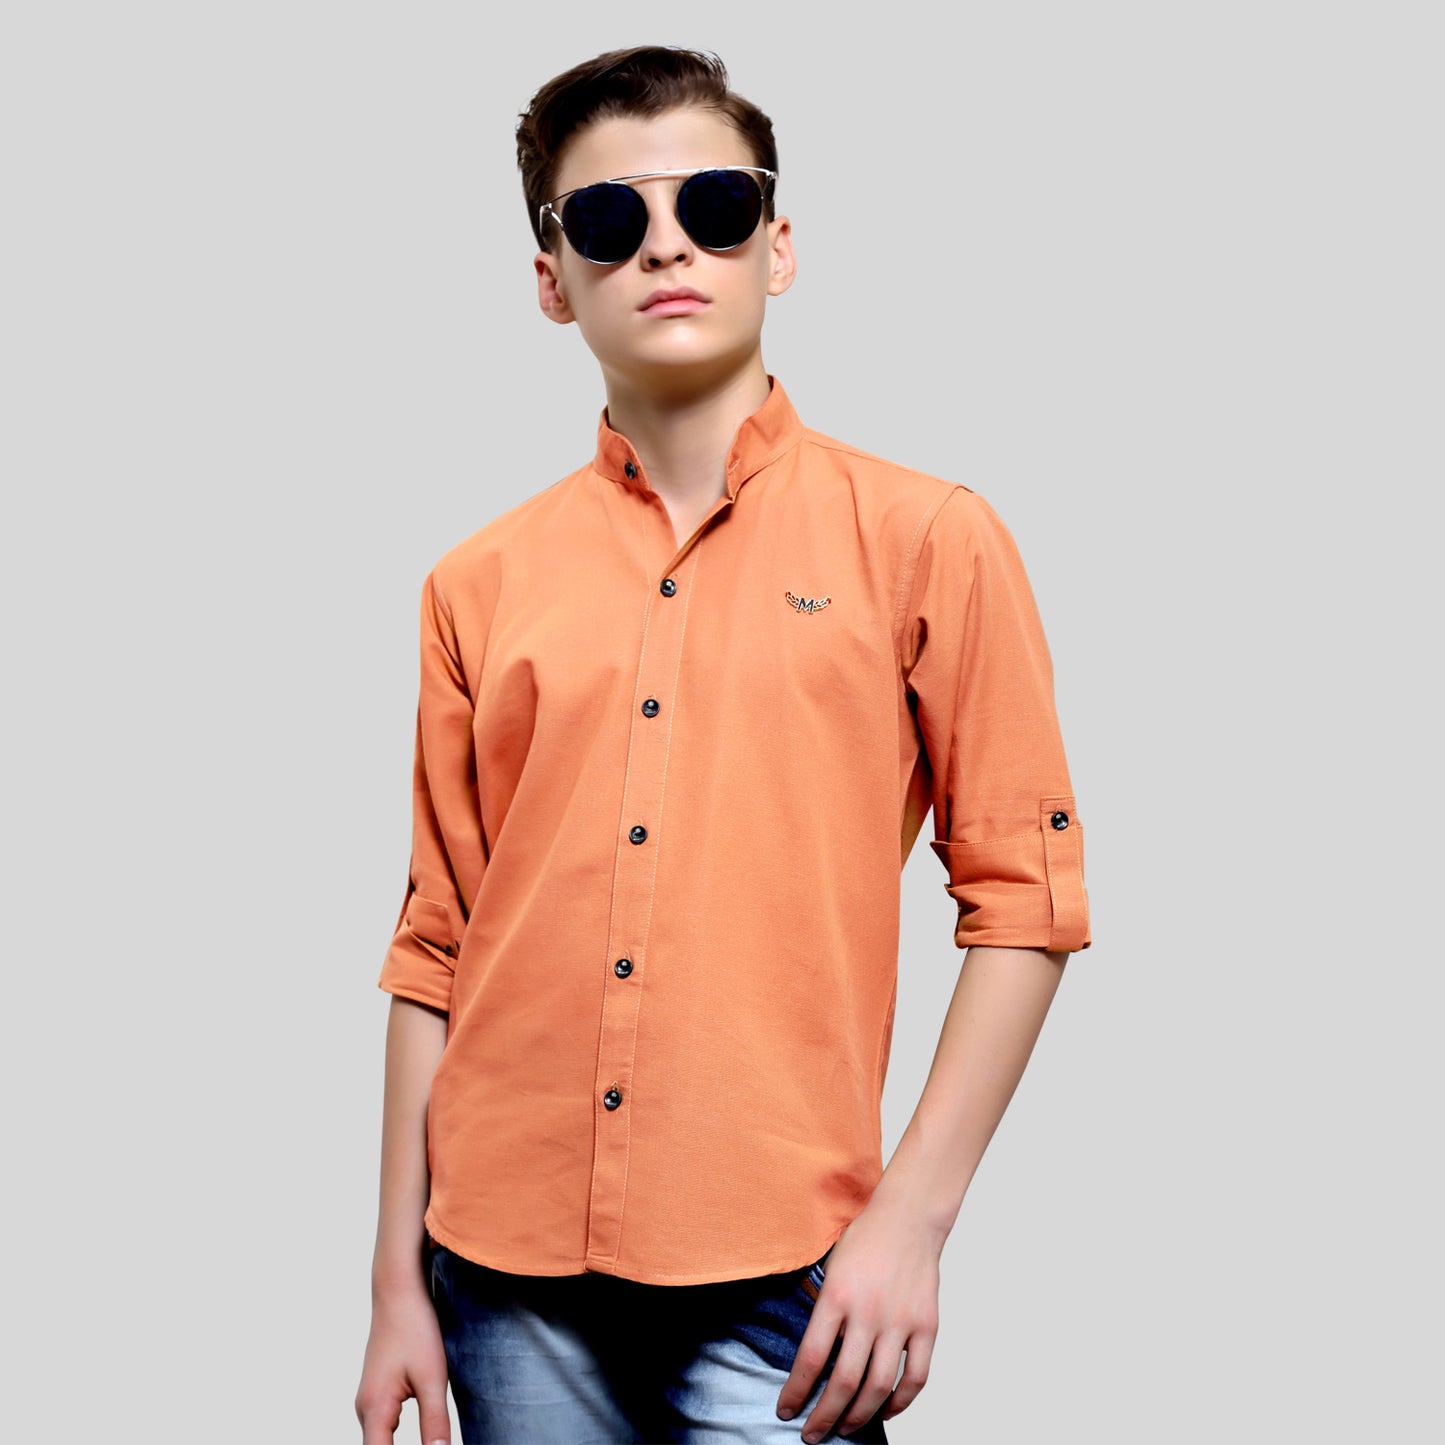 Spruce-Up Swagger: Boys' Classic Collar Shirt for Effortless Elegance!